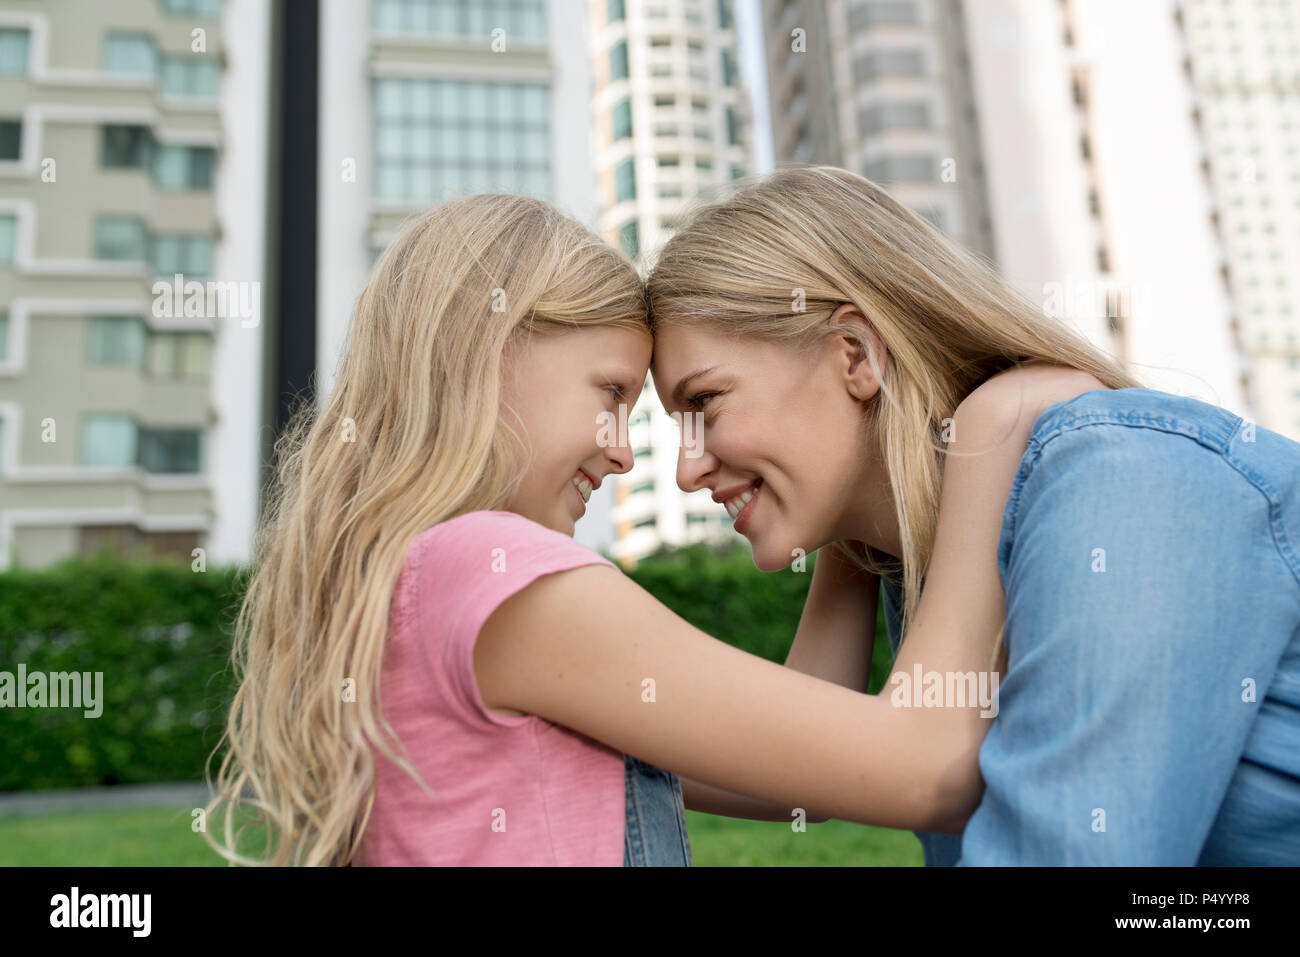 Happy mother and daughter smiling at each other urban city garden Stock Photo